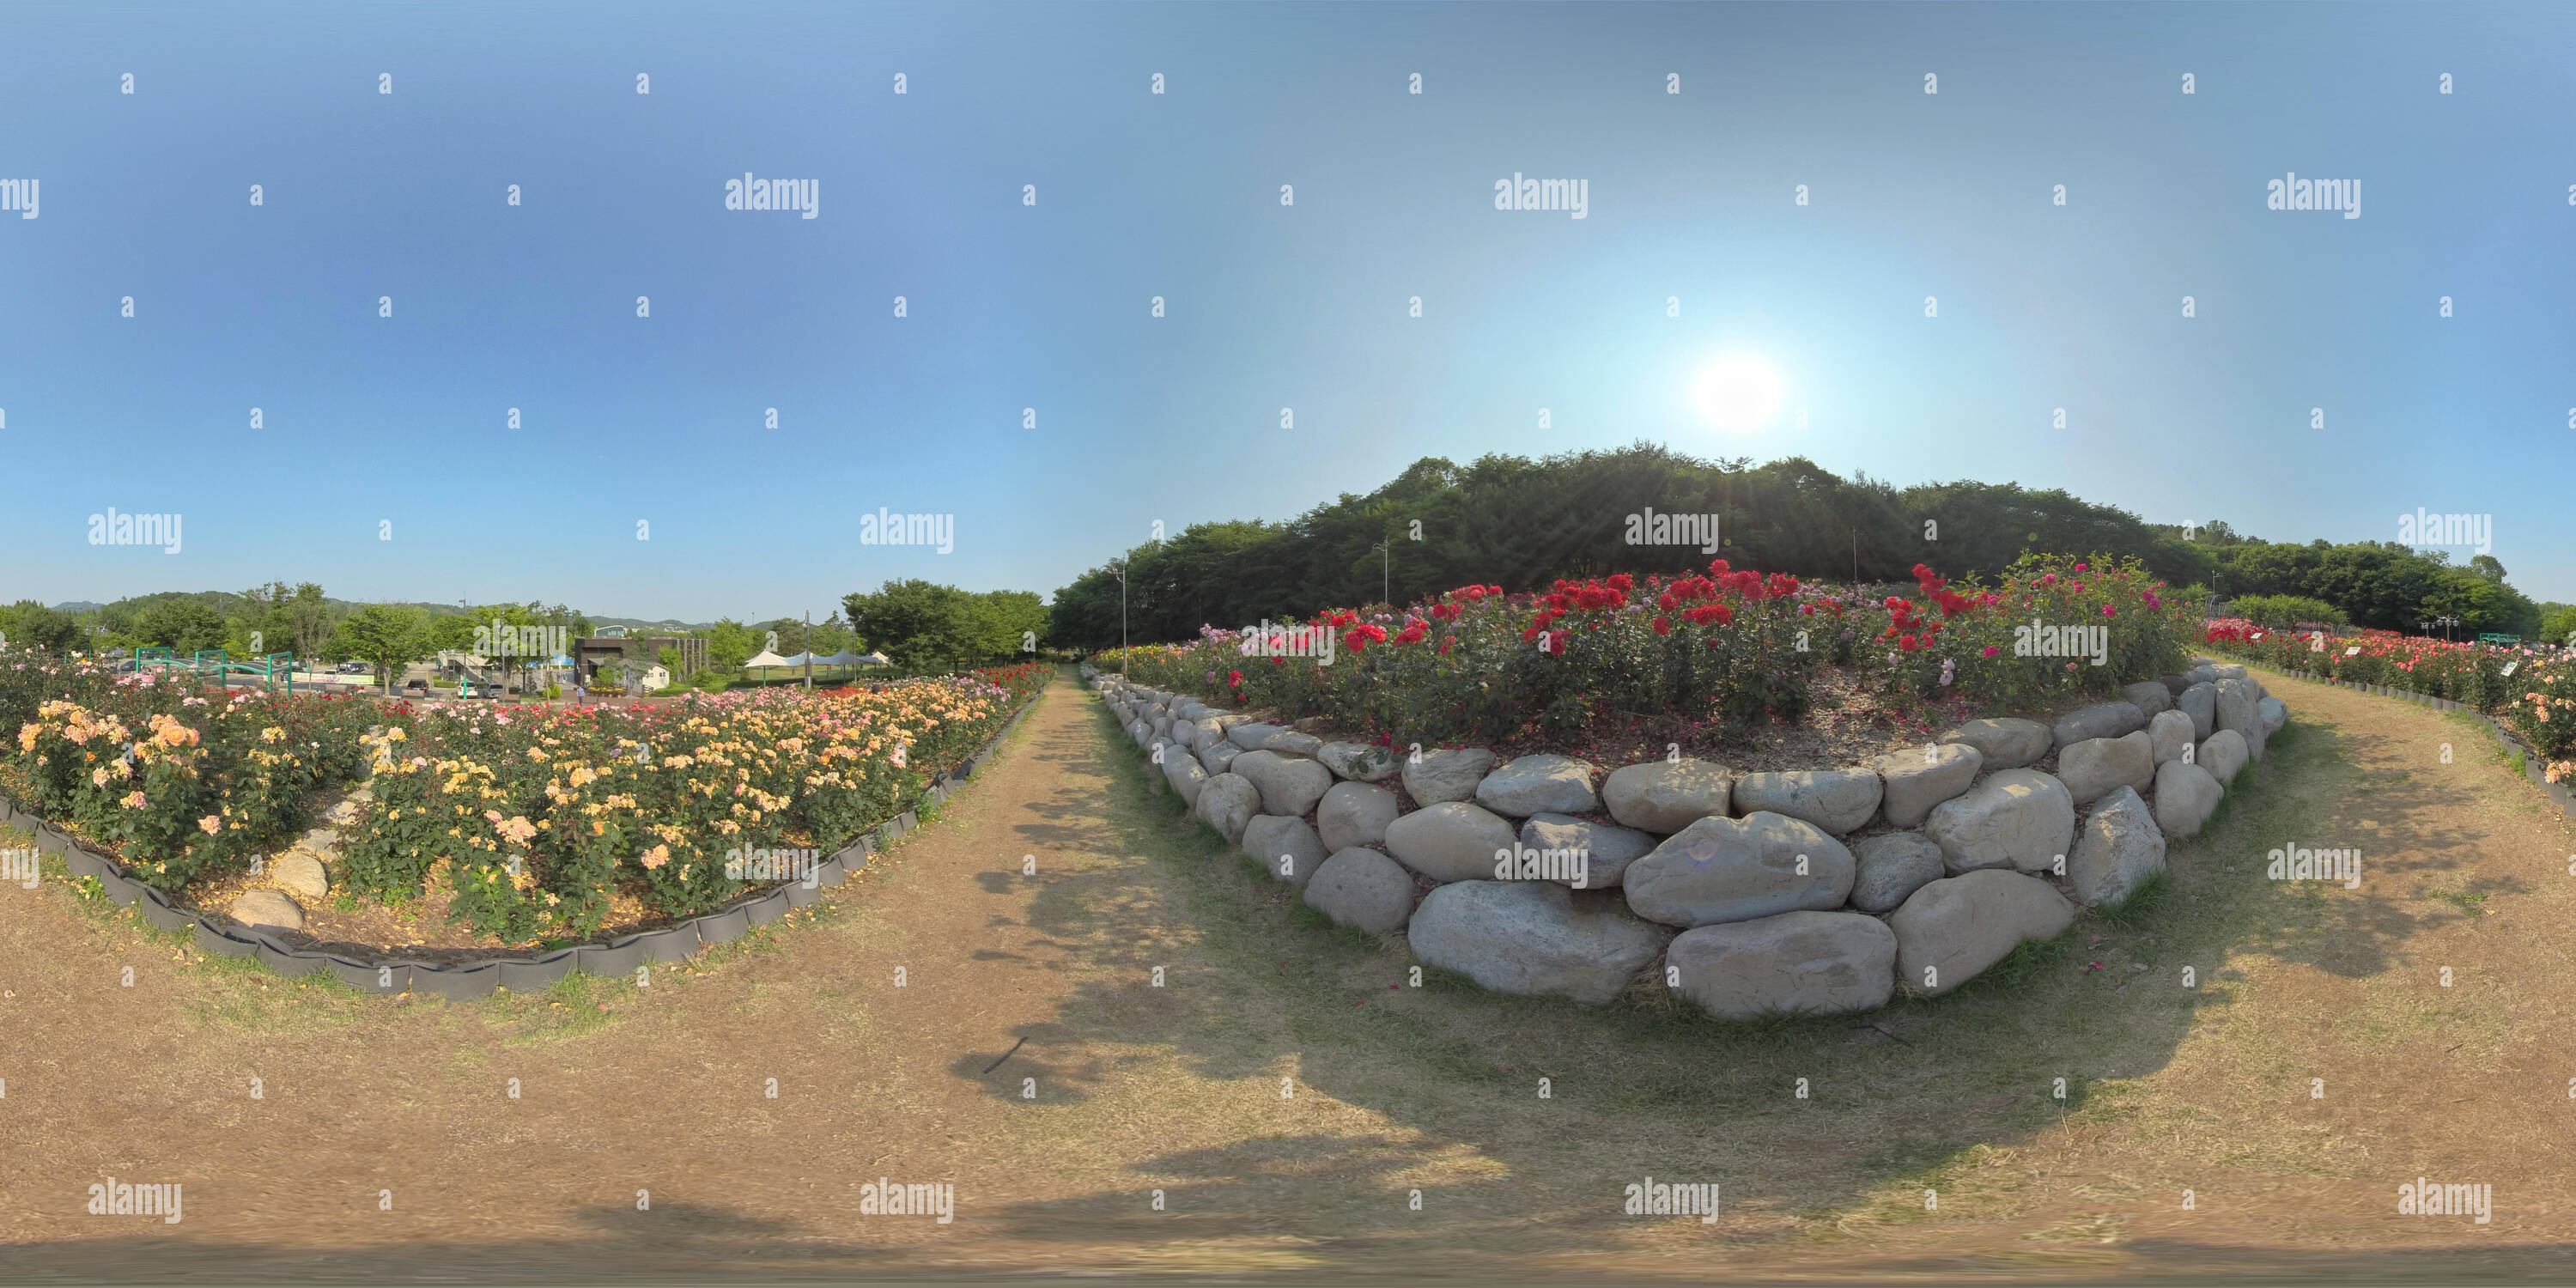 360 degree panoramic view of Ansan, South Korea - 12 June 2019. Panorama 360 degrees view in park. Forest and Park 360 image, VR AR content.